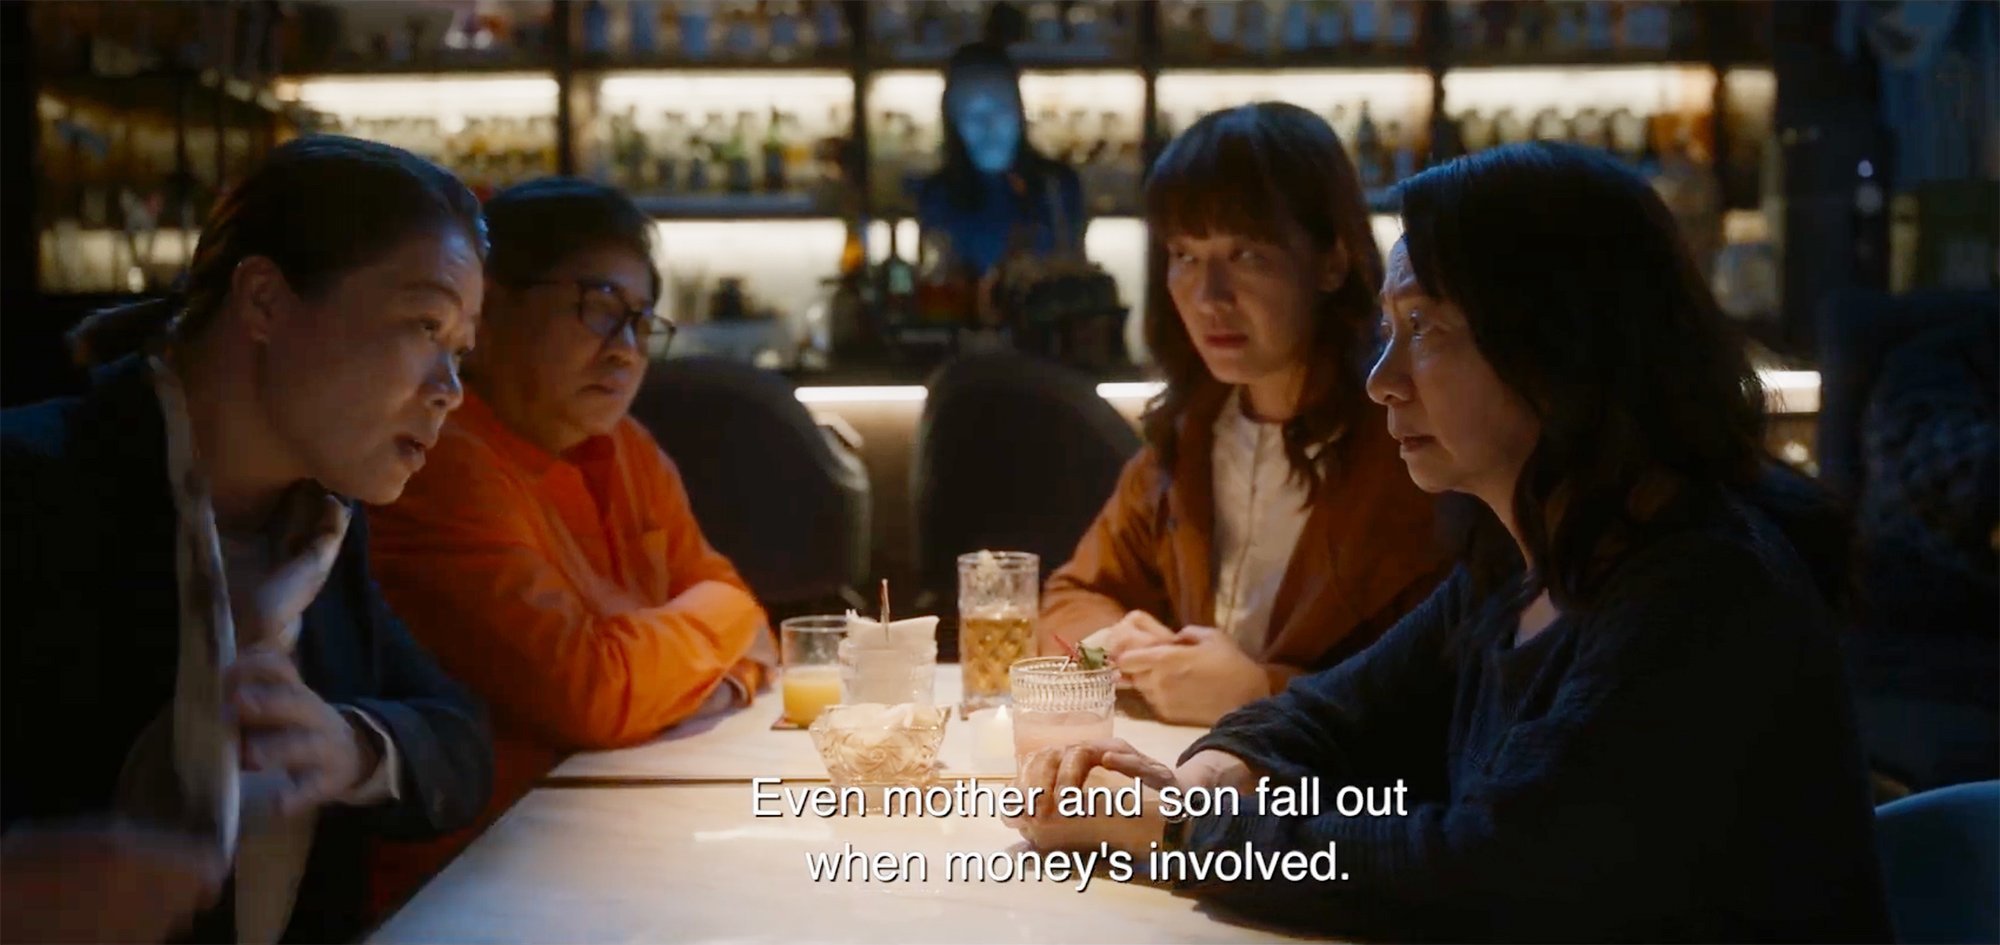 Trailer for LGBTQ Film 'All Shall Be Well' About a Hong Kong Family